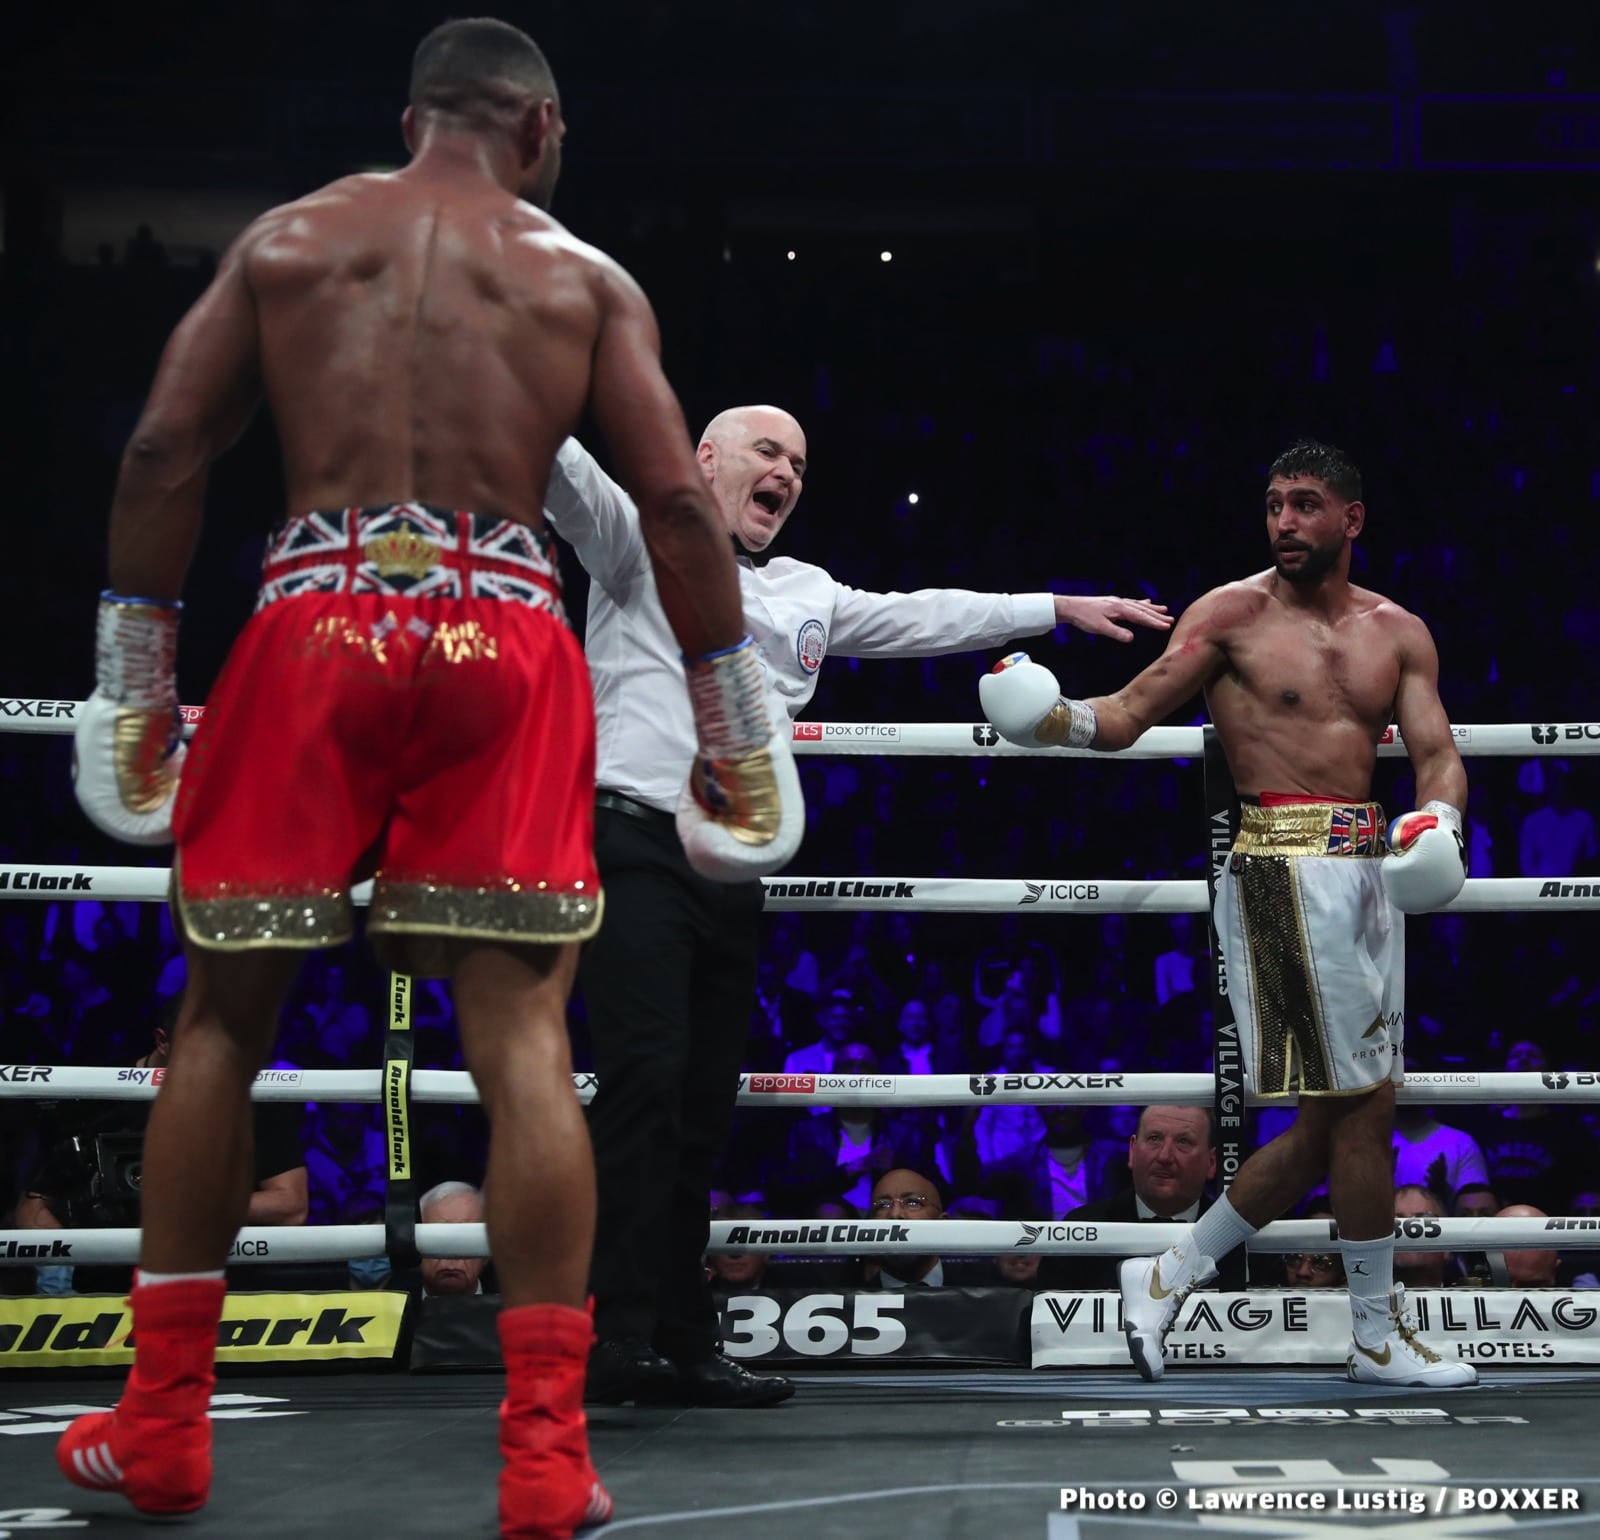 Image: Ben Shalom wants Amir Khan to show "he's not finished" before given Brook rematch